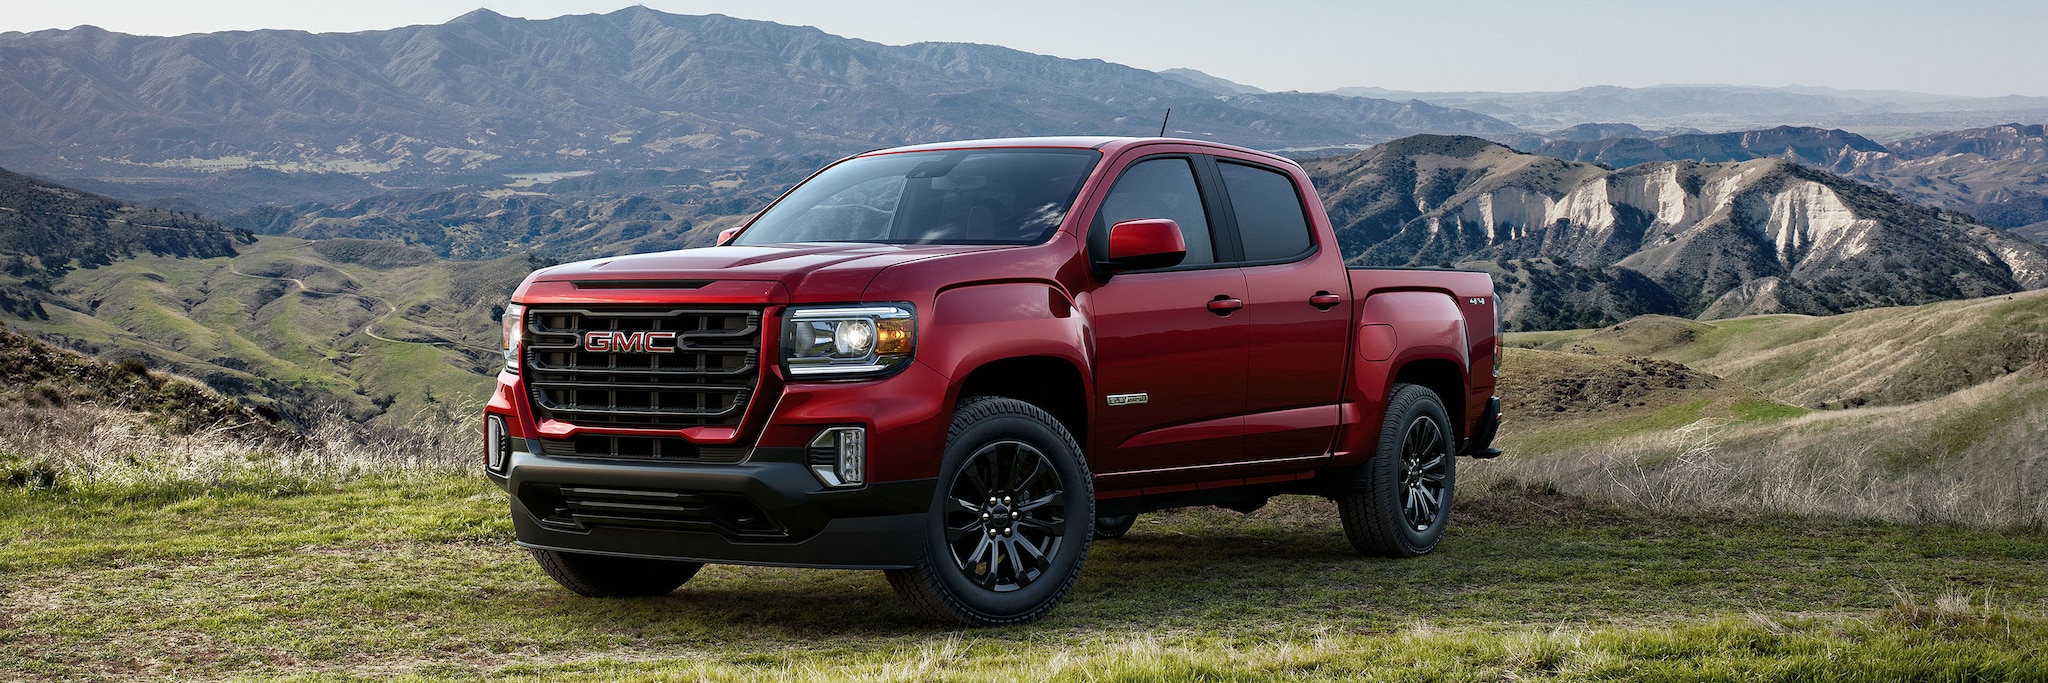 2021 GMC Canyon Overview - The News Wheel